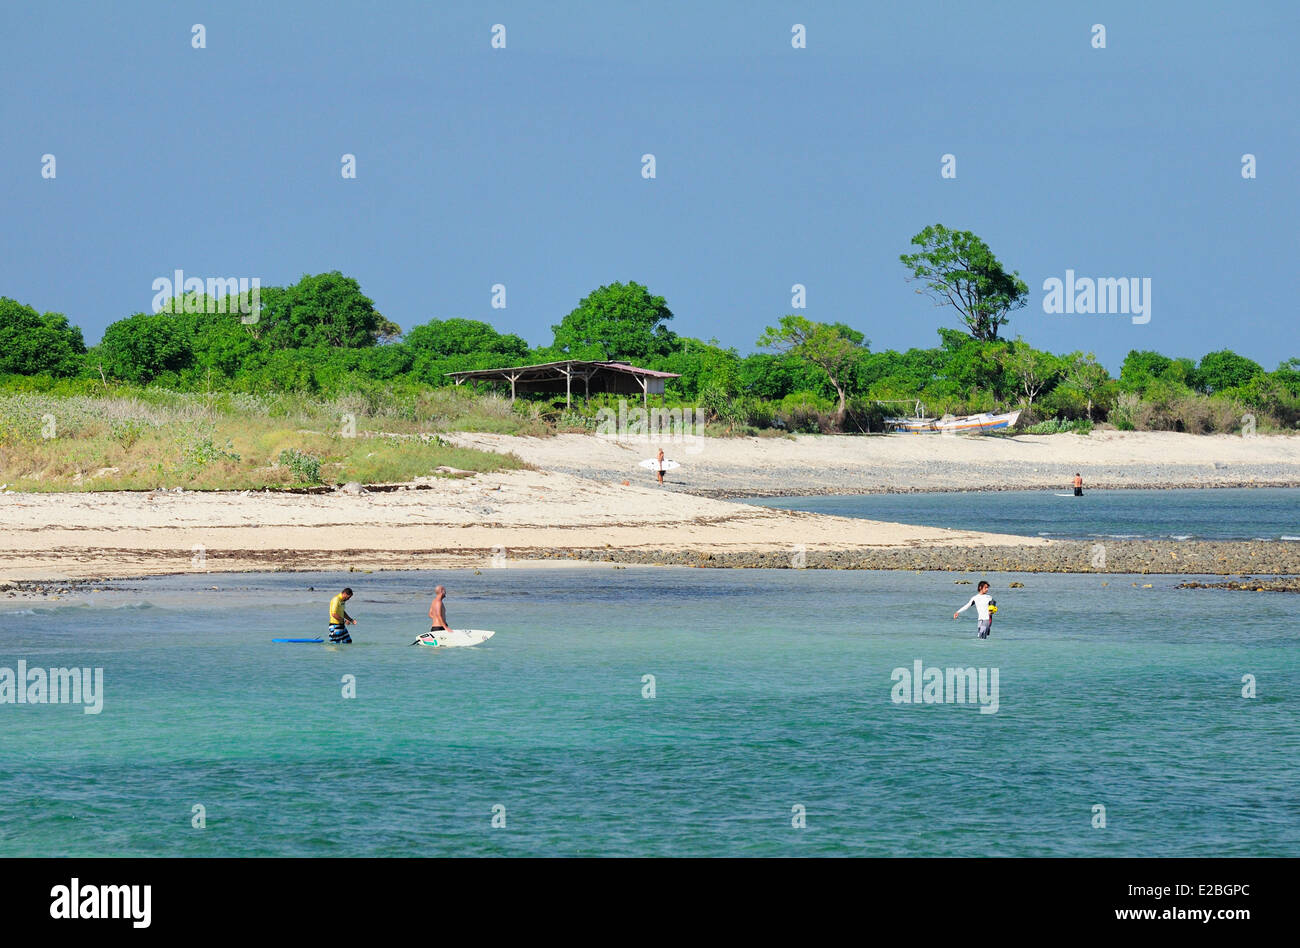 Indonesia, Sumbawa, Pantai Lakey, the beach is famous for its surf breaks Stock Photo